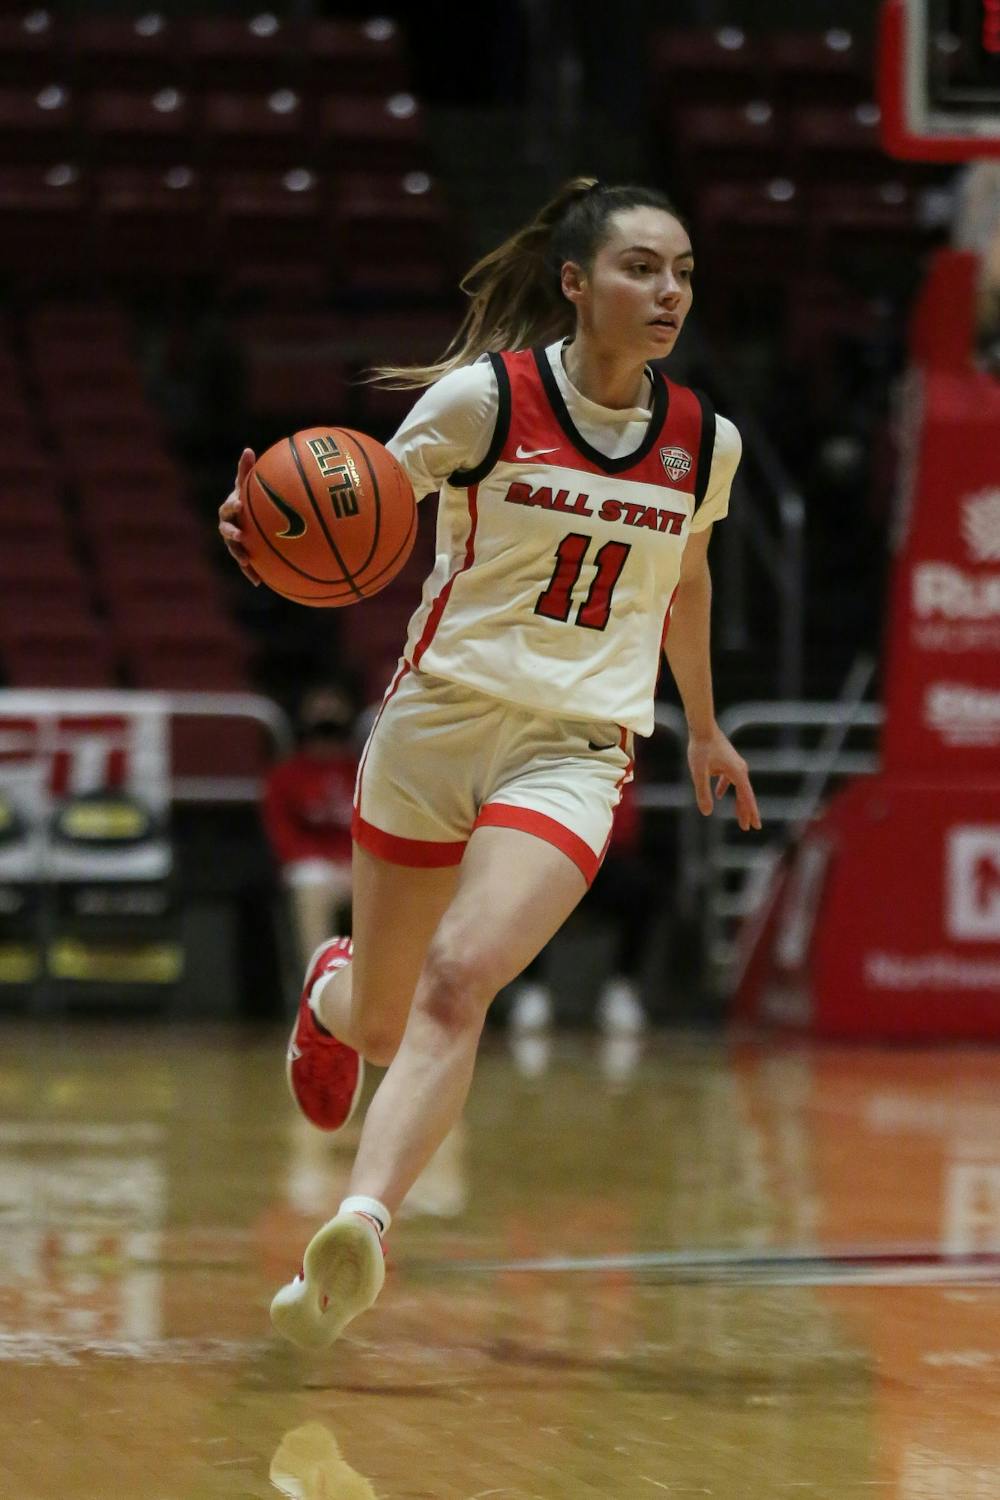 Junior Sydney Freeman runs down the court on Feb. 16, at Worthen Arena. Freeman scored 10 points for the Cardinals. Madelyn Guinn, DN